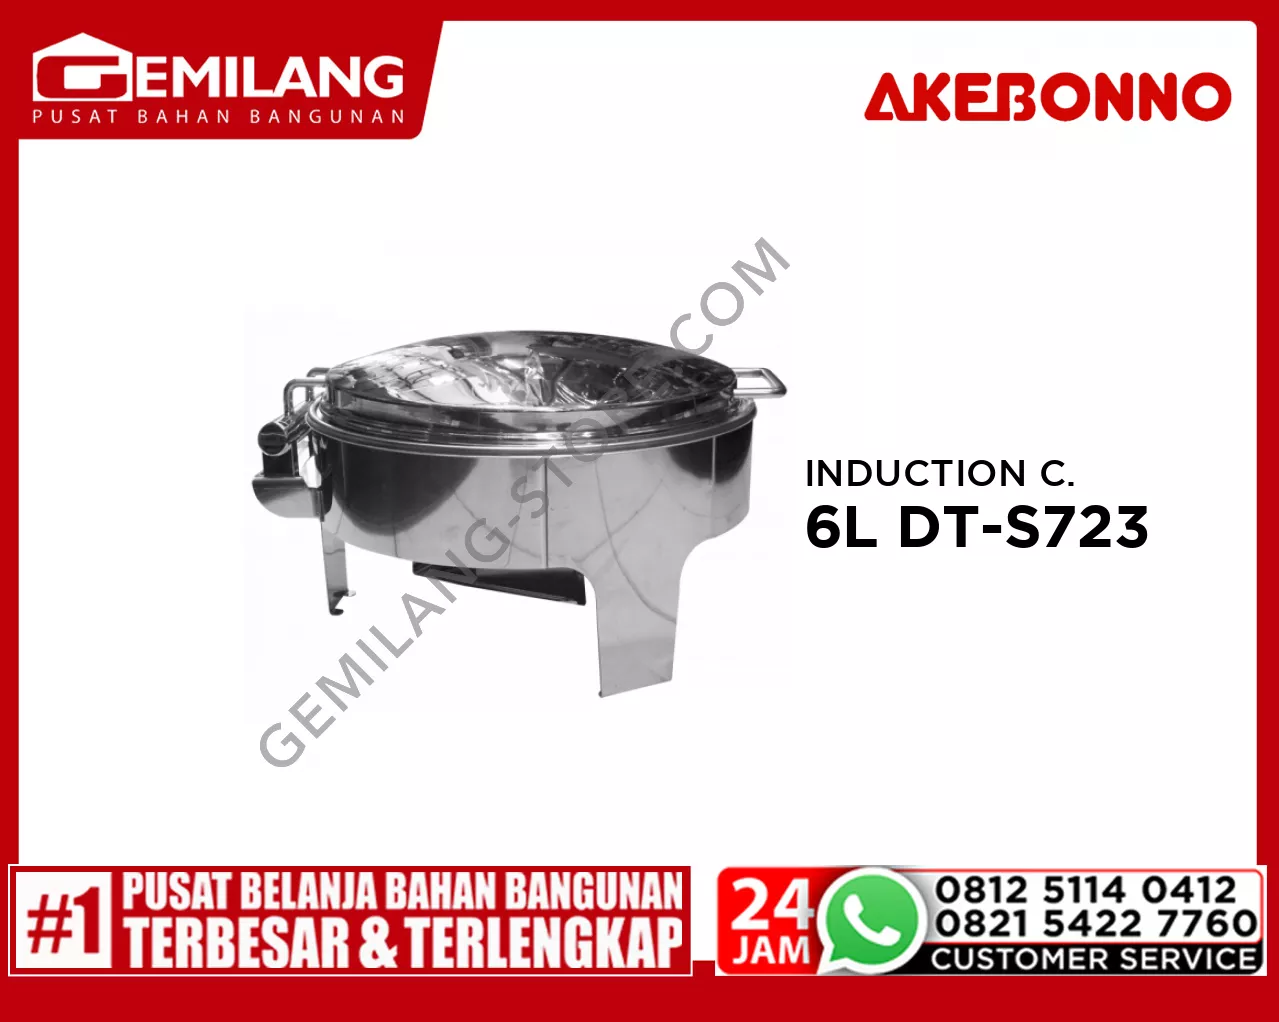 AKEBONNO ROUND HYDRAULIC INDUCTION CHAFER 6ltr DT-S723